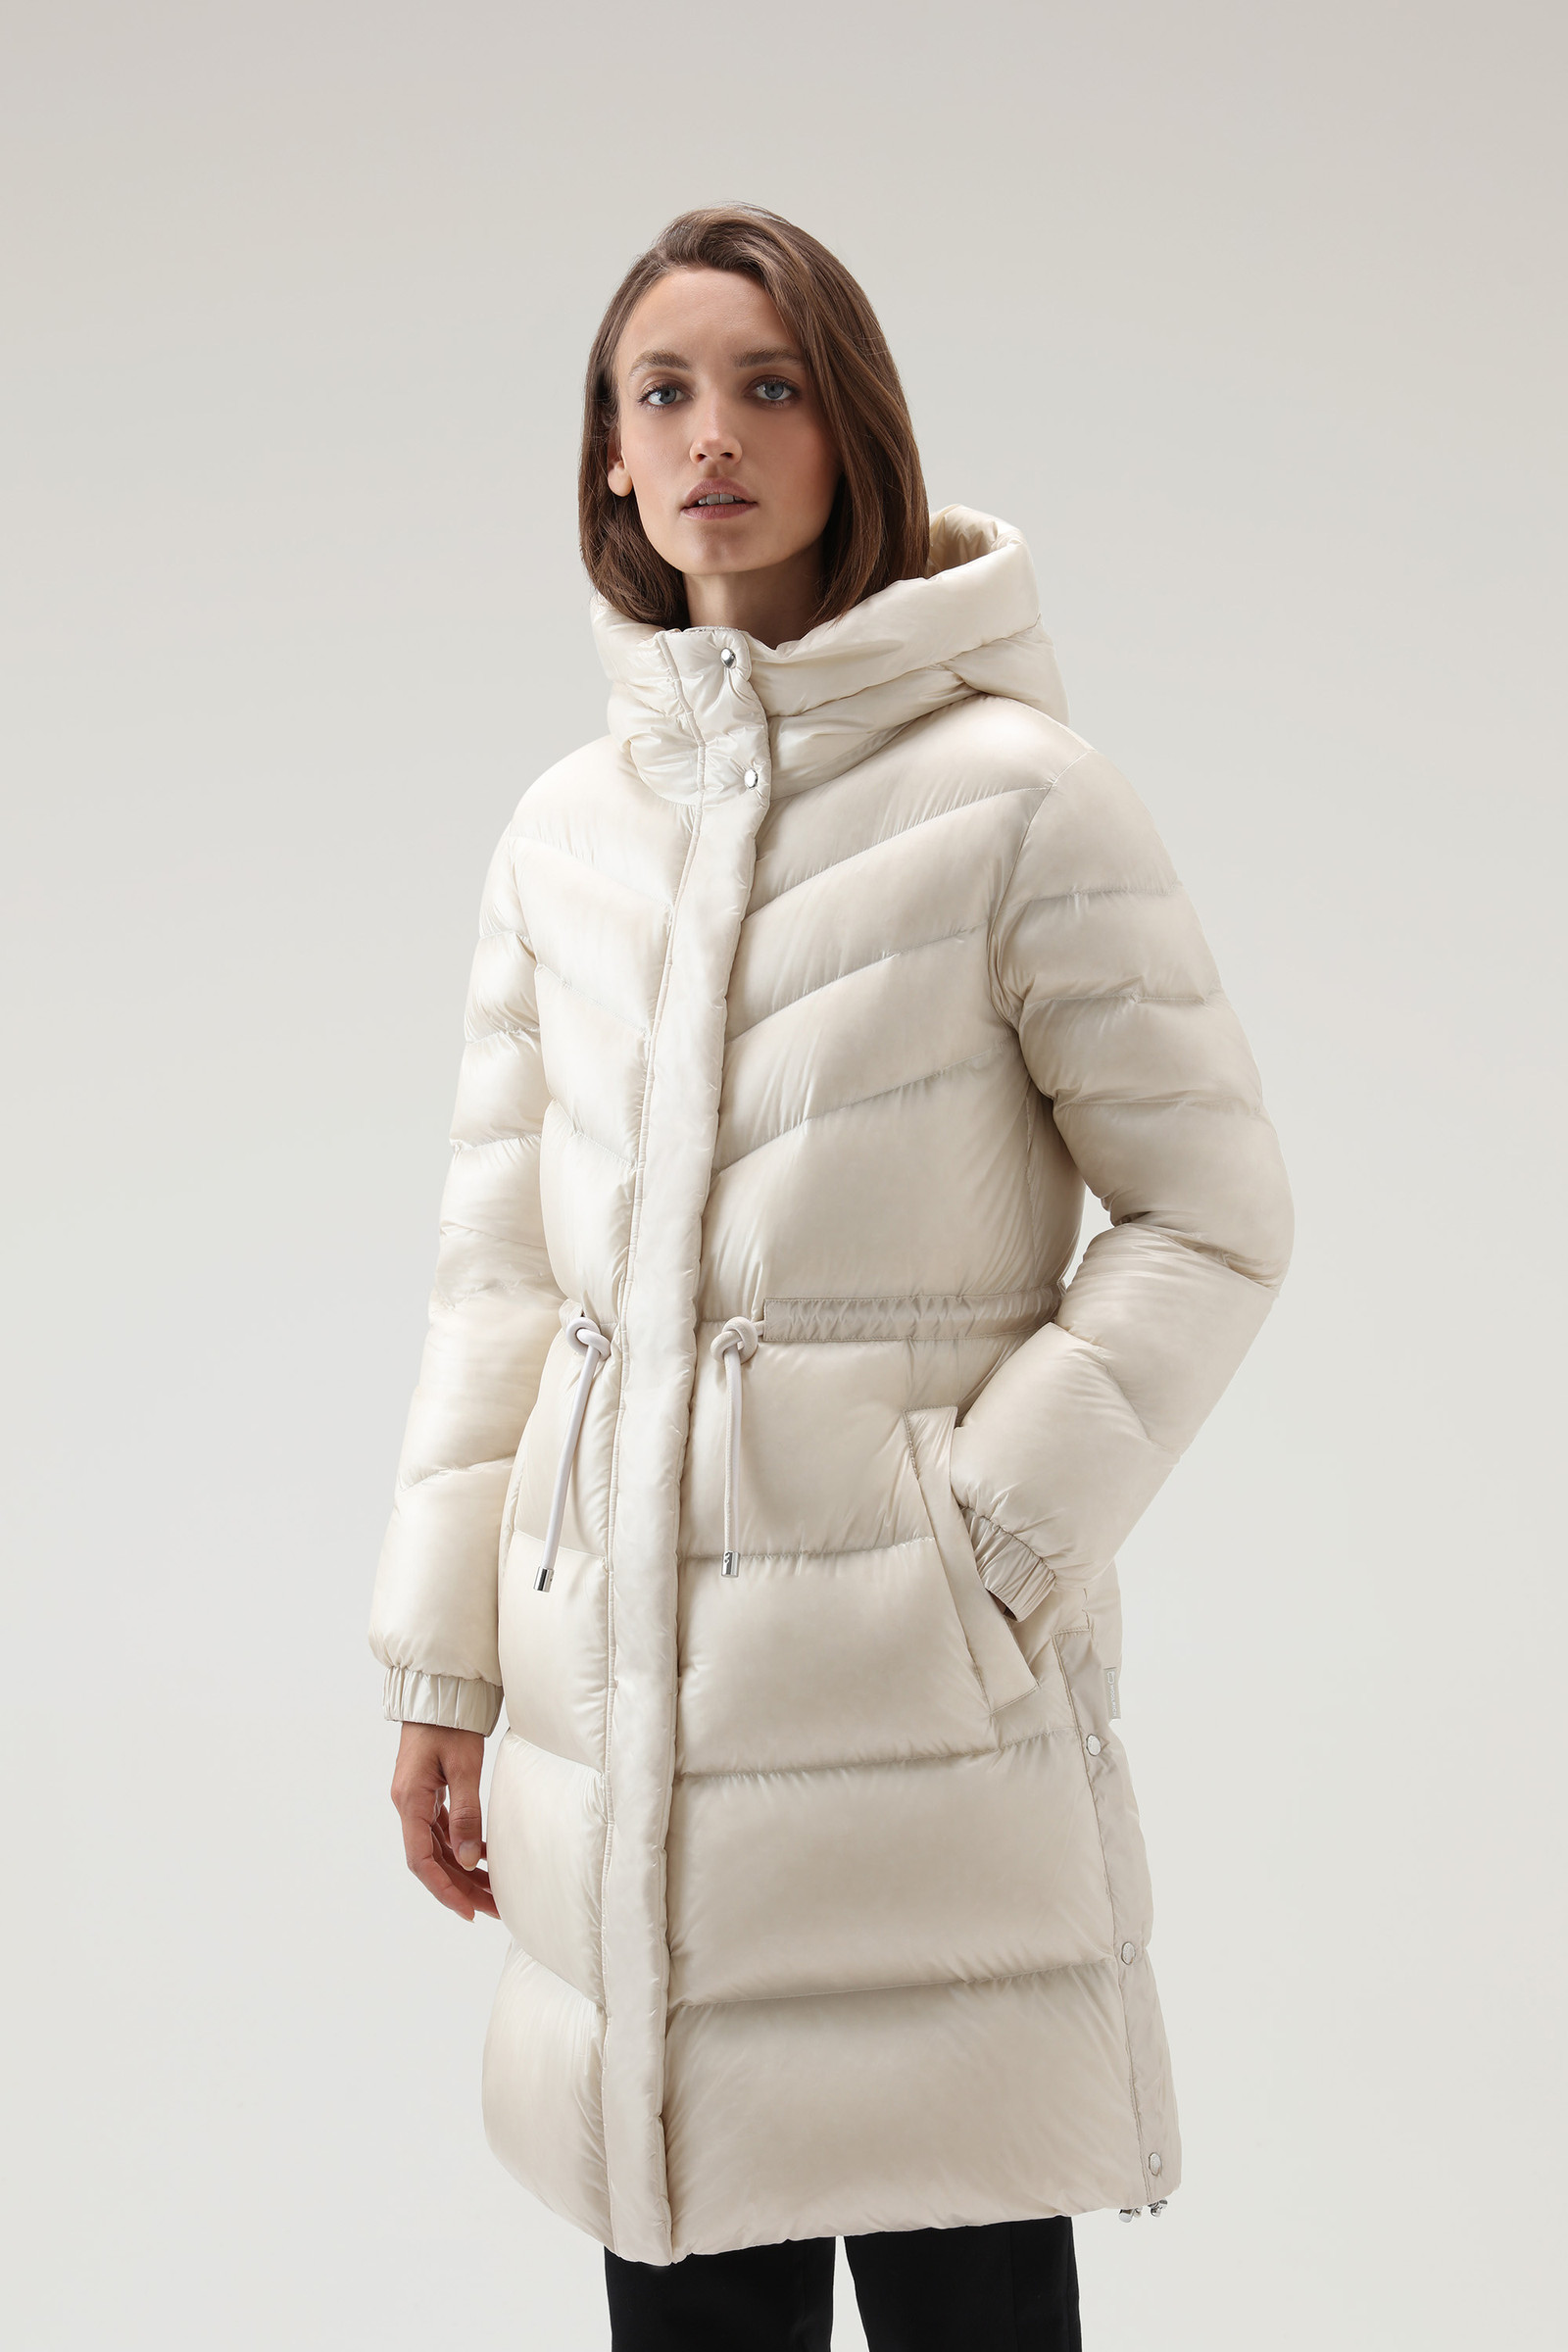 Aliquippa Long Down Jacket in Glossy Nylon with a Drawstring Waist - Women  - White